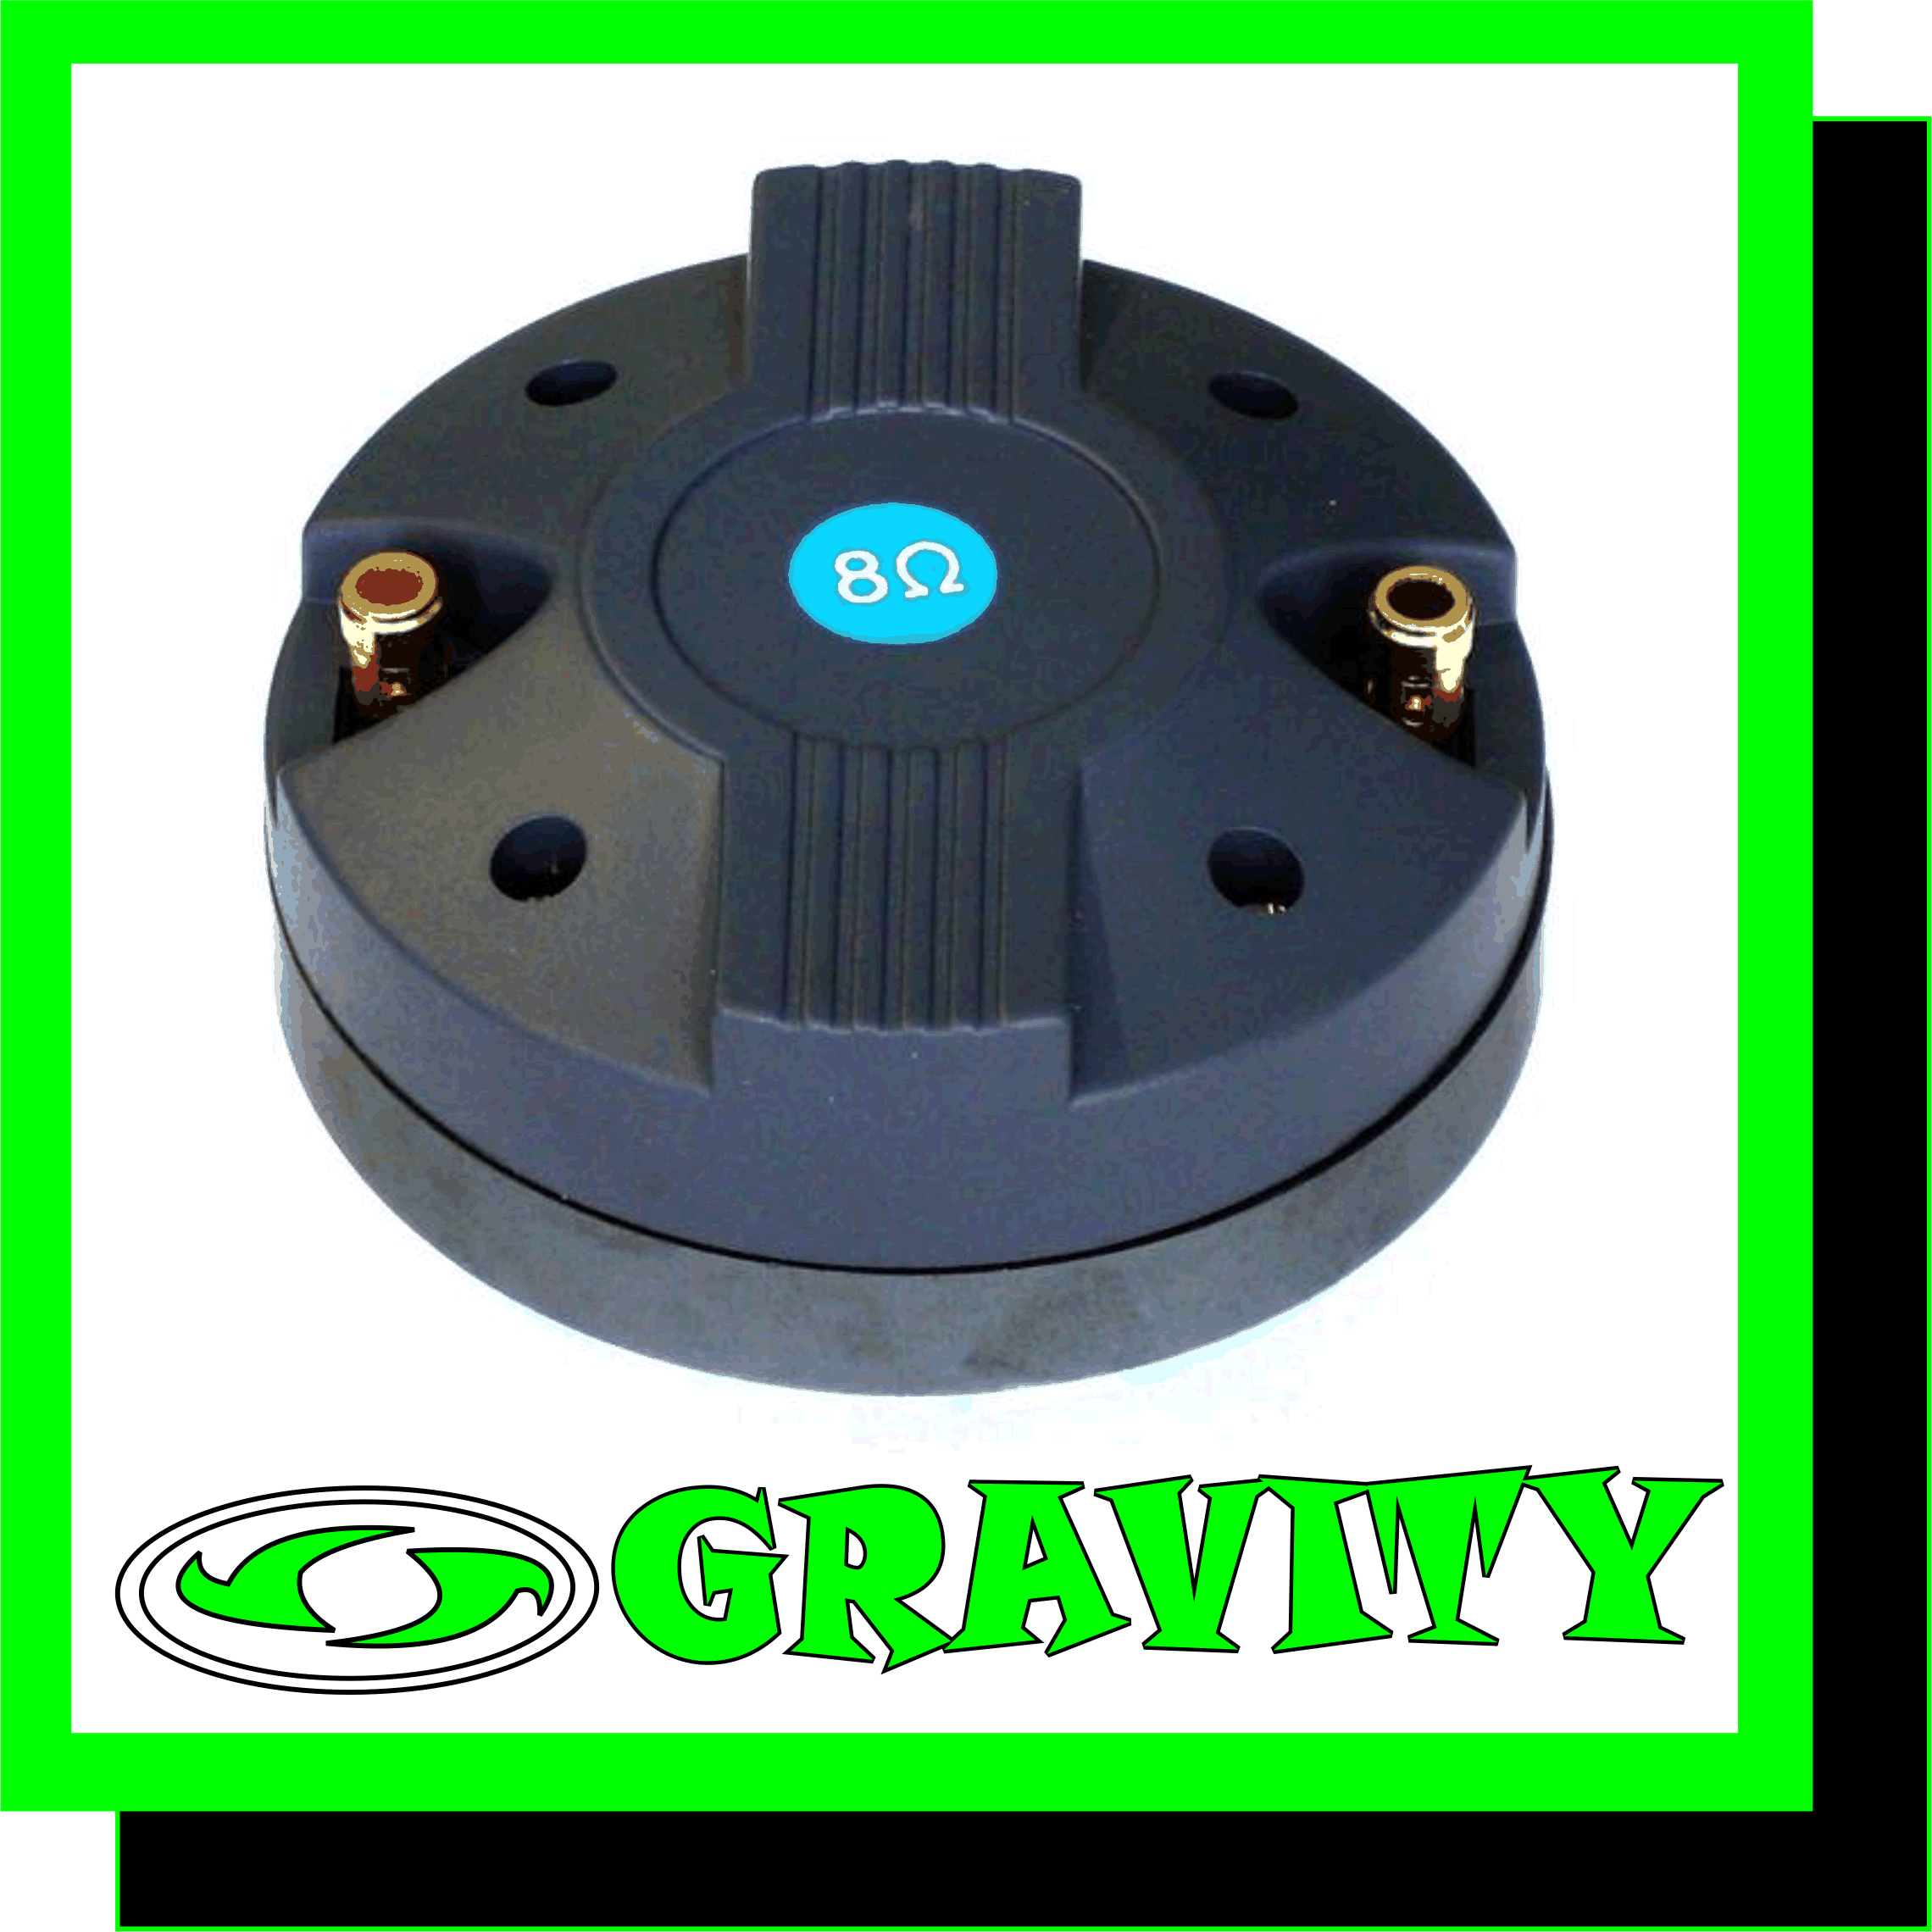 80w 44mm compression super tweeter replacement drivers JBL samson wharfedale citronic peavey replacement tweeter drivers gravity dj store 0315072463